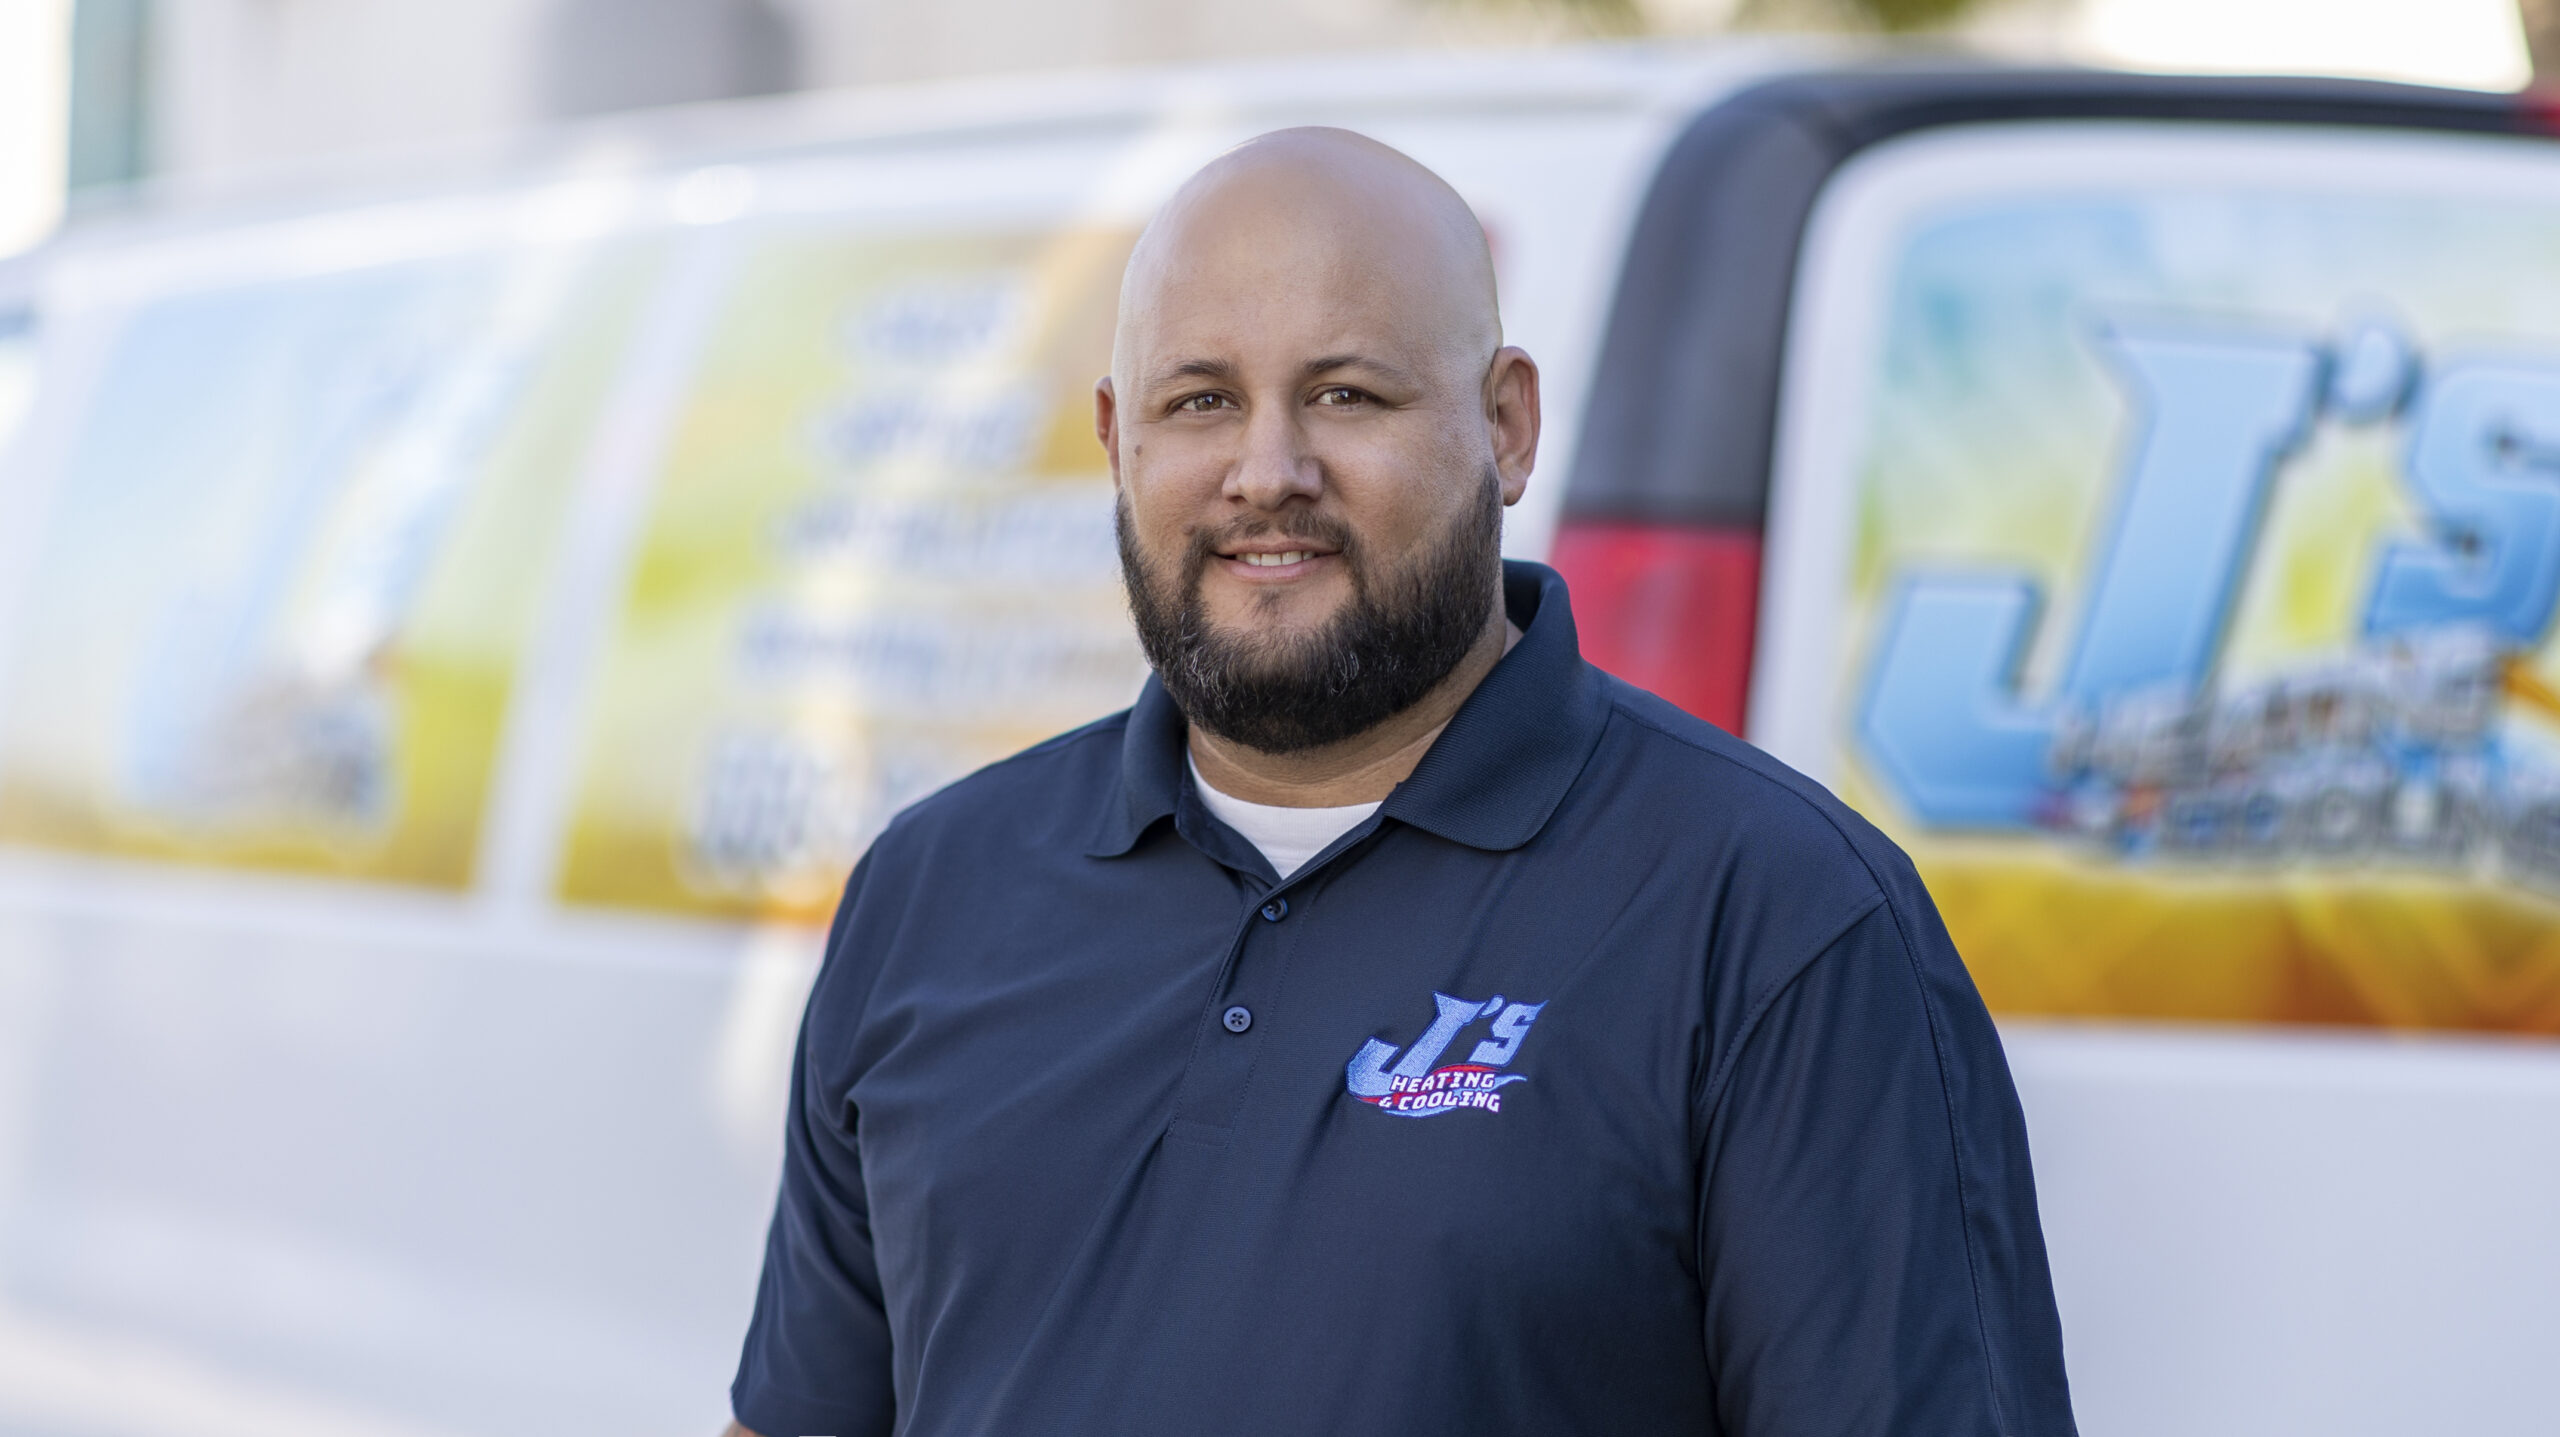 J's Heating and Cooling Joey Cervantes Van profile picture.